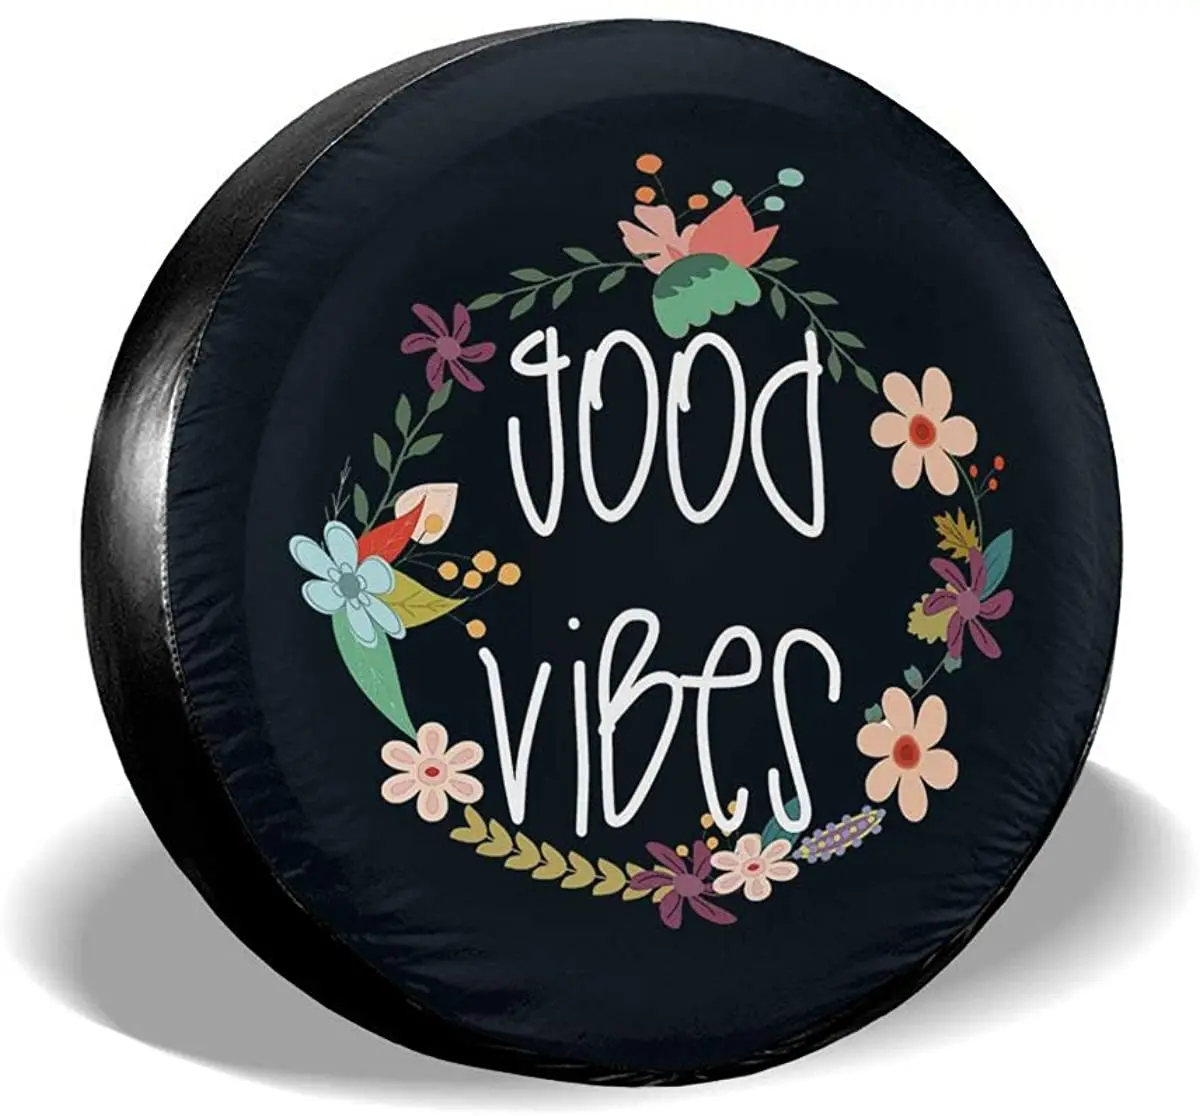 

MSGUIDE Spare Tire Cover Good Vibes for Jeep Trailer Rv Truck 14 15 16 17 Inch Sunscreen Dustproof Corrosion Proof Wheel Cover